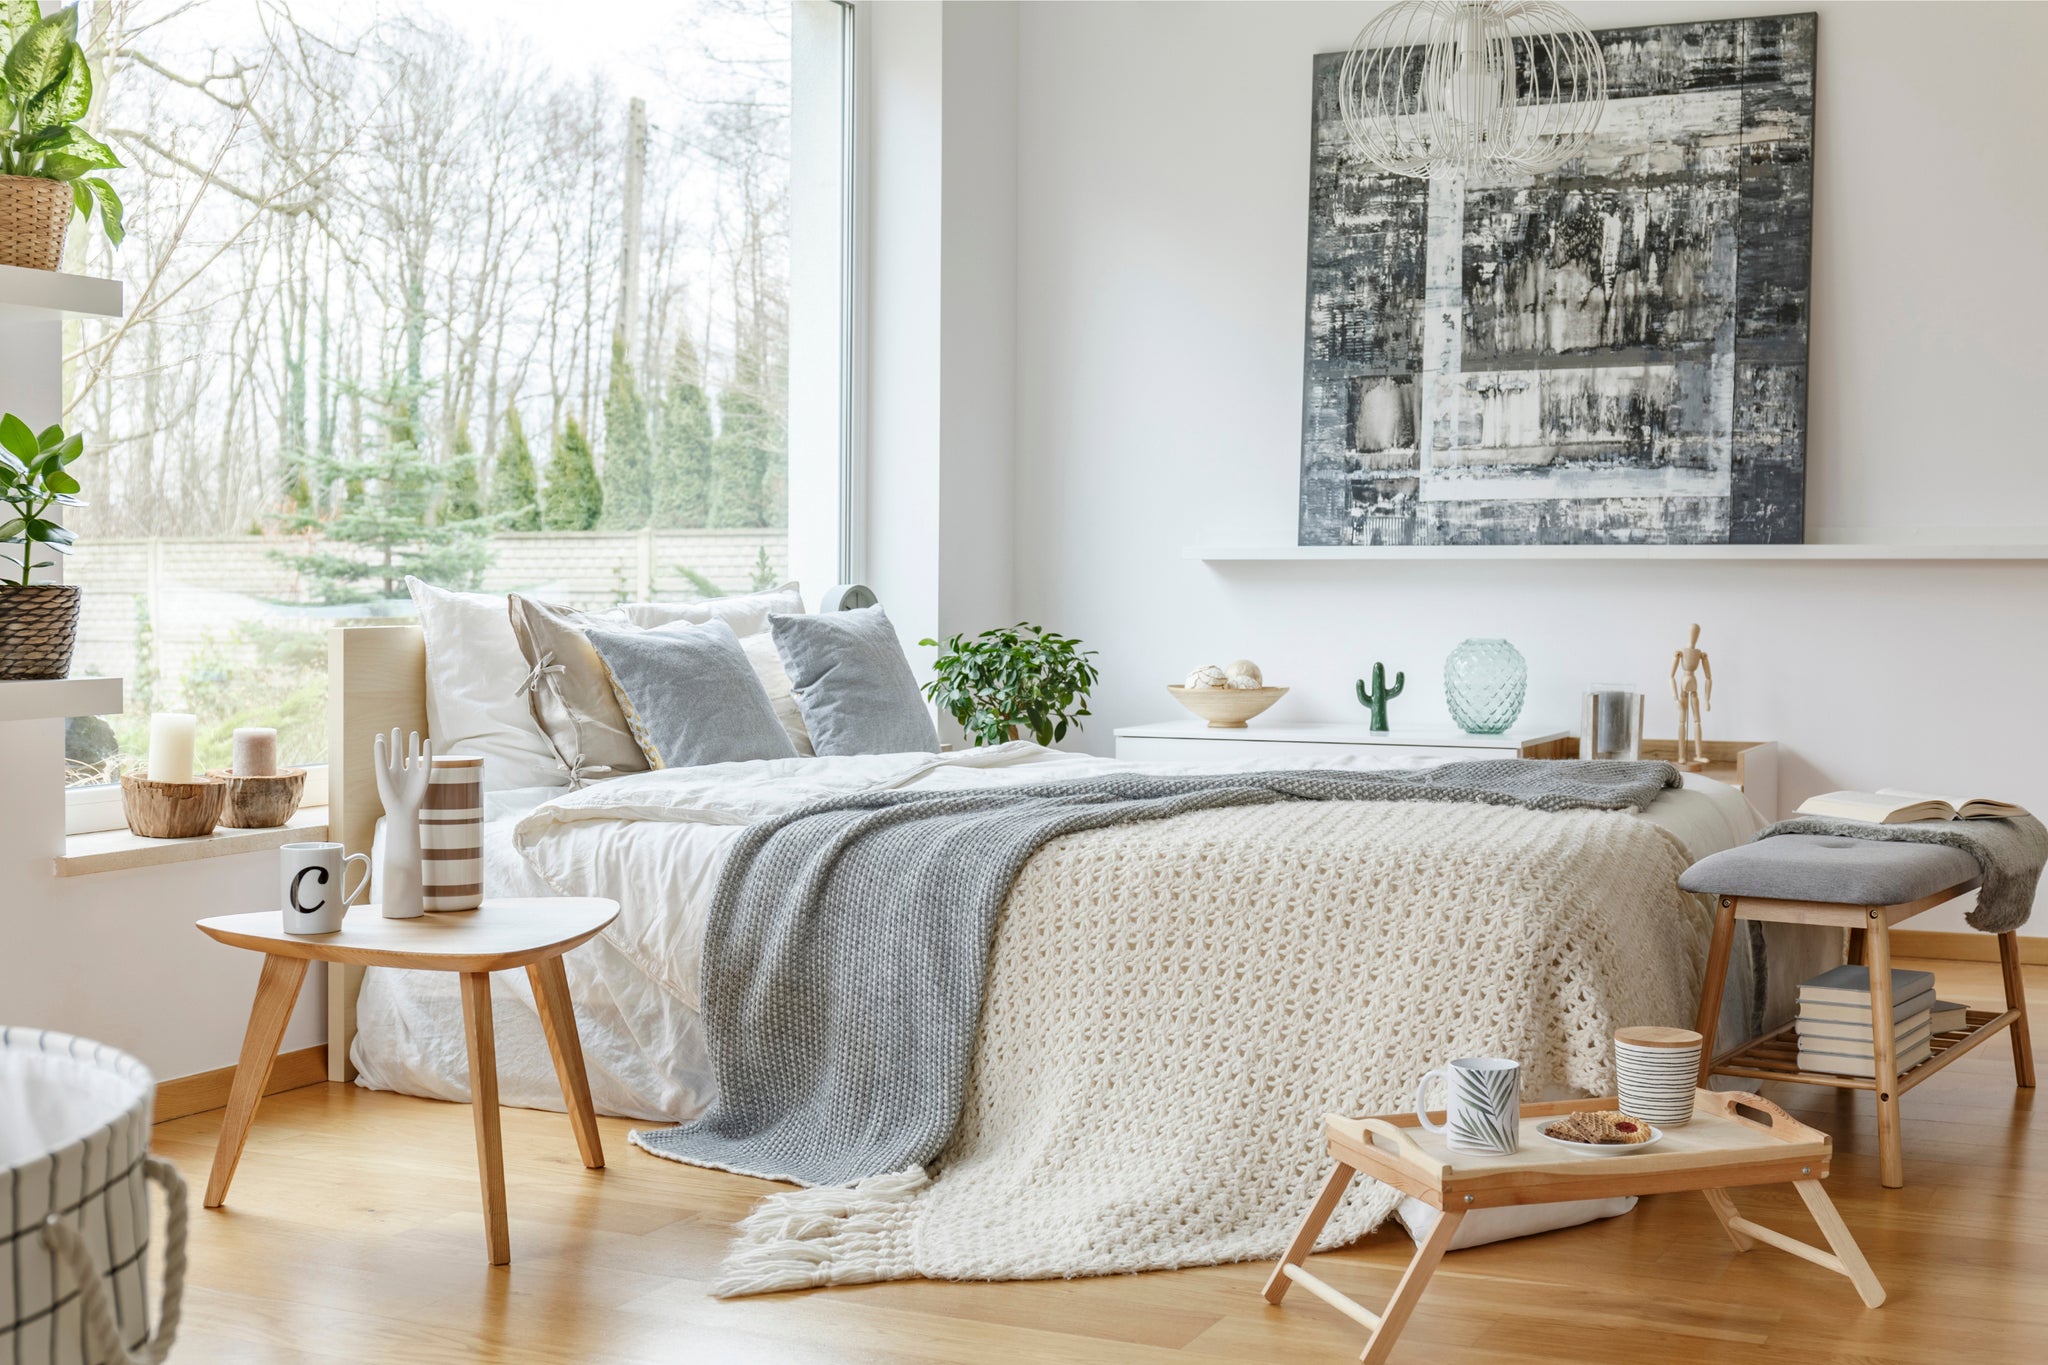 Tips to make Your Home Feel Cozy